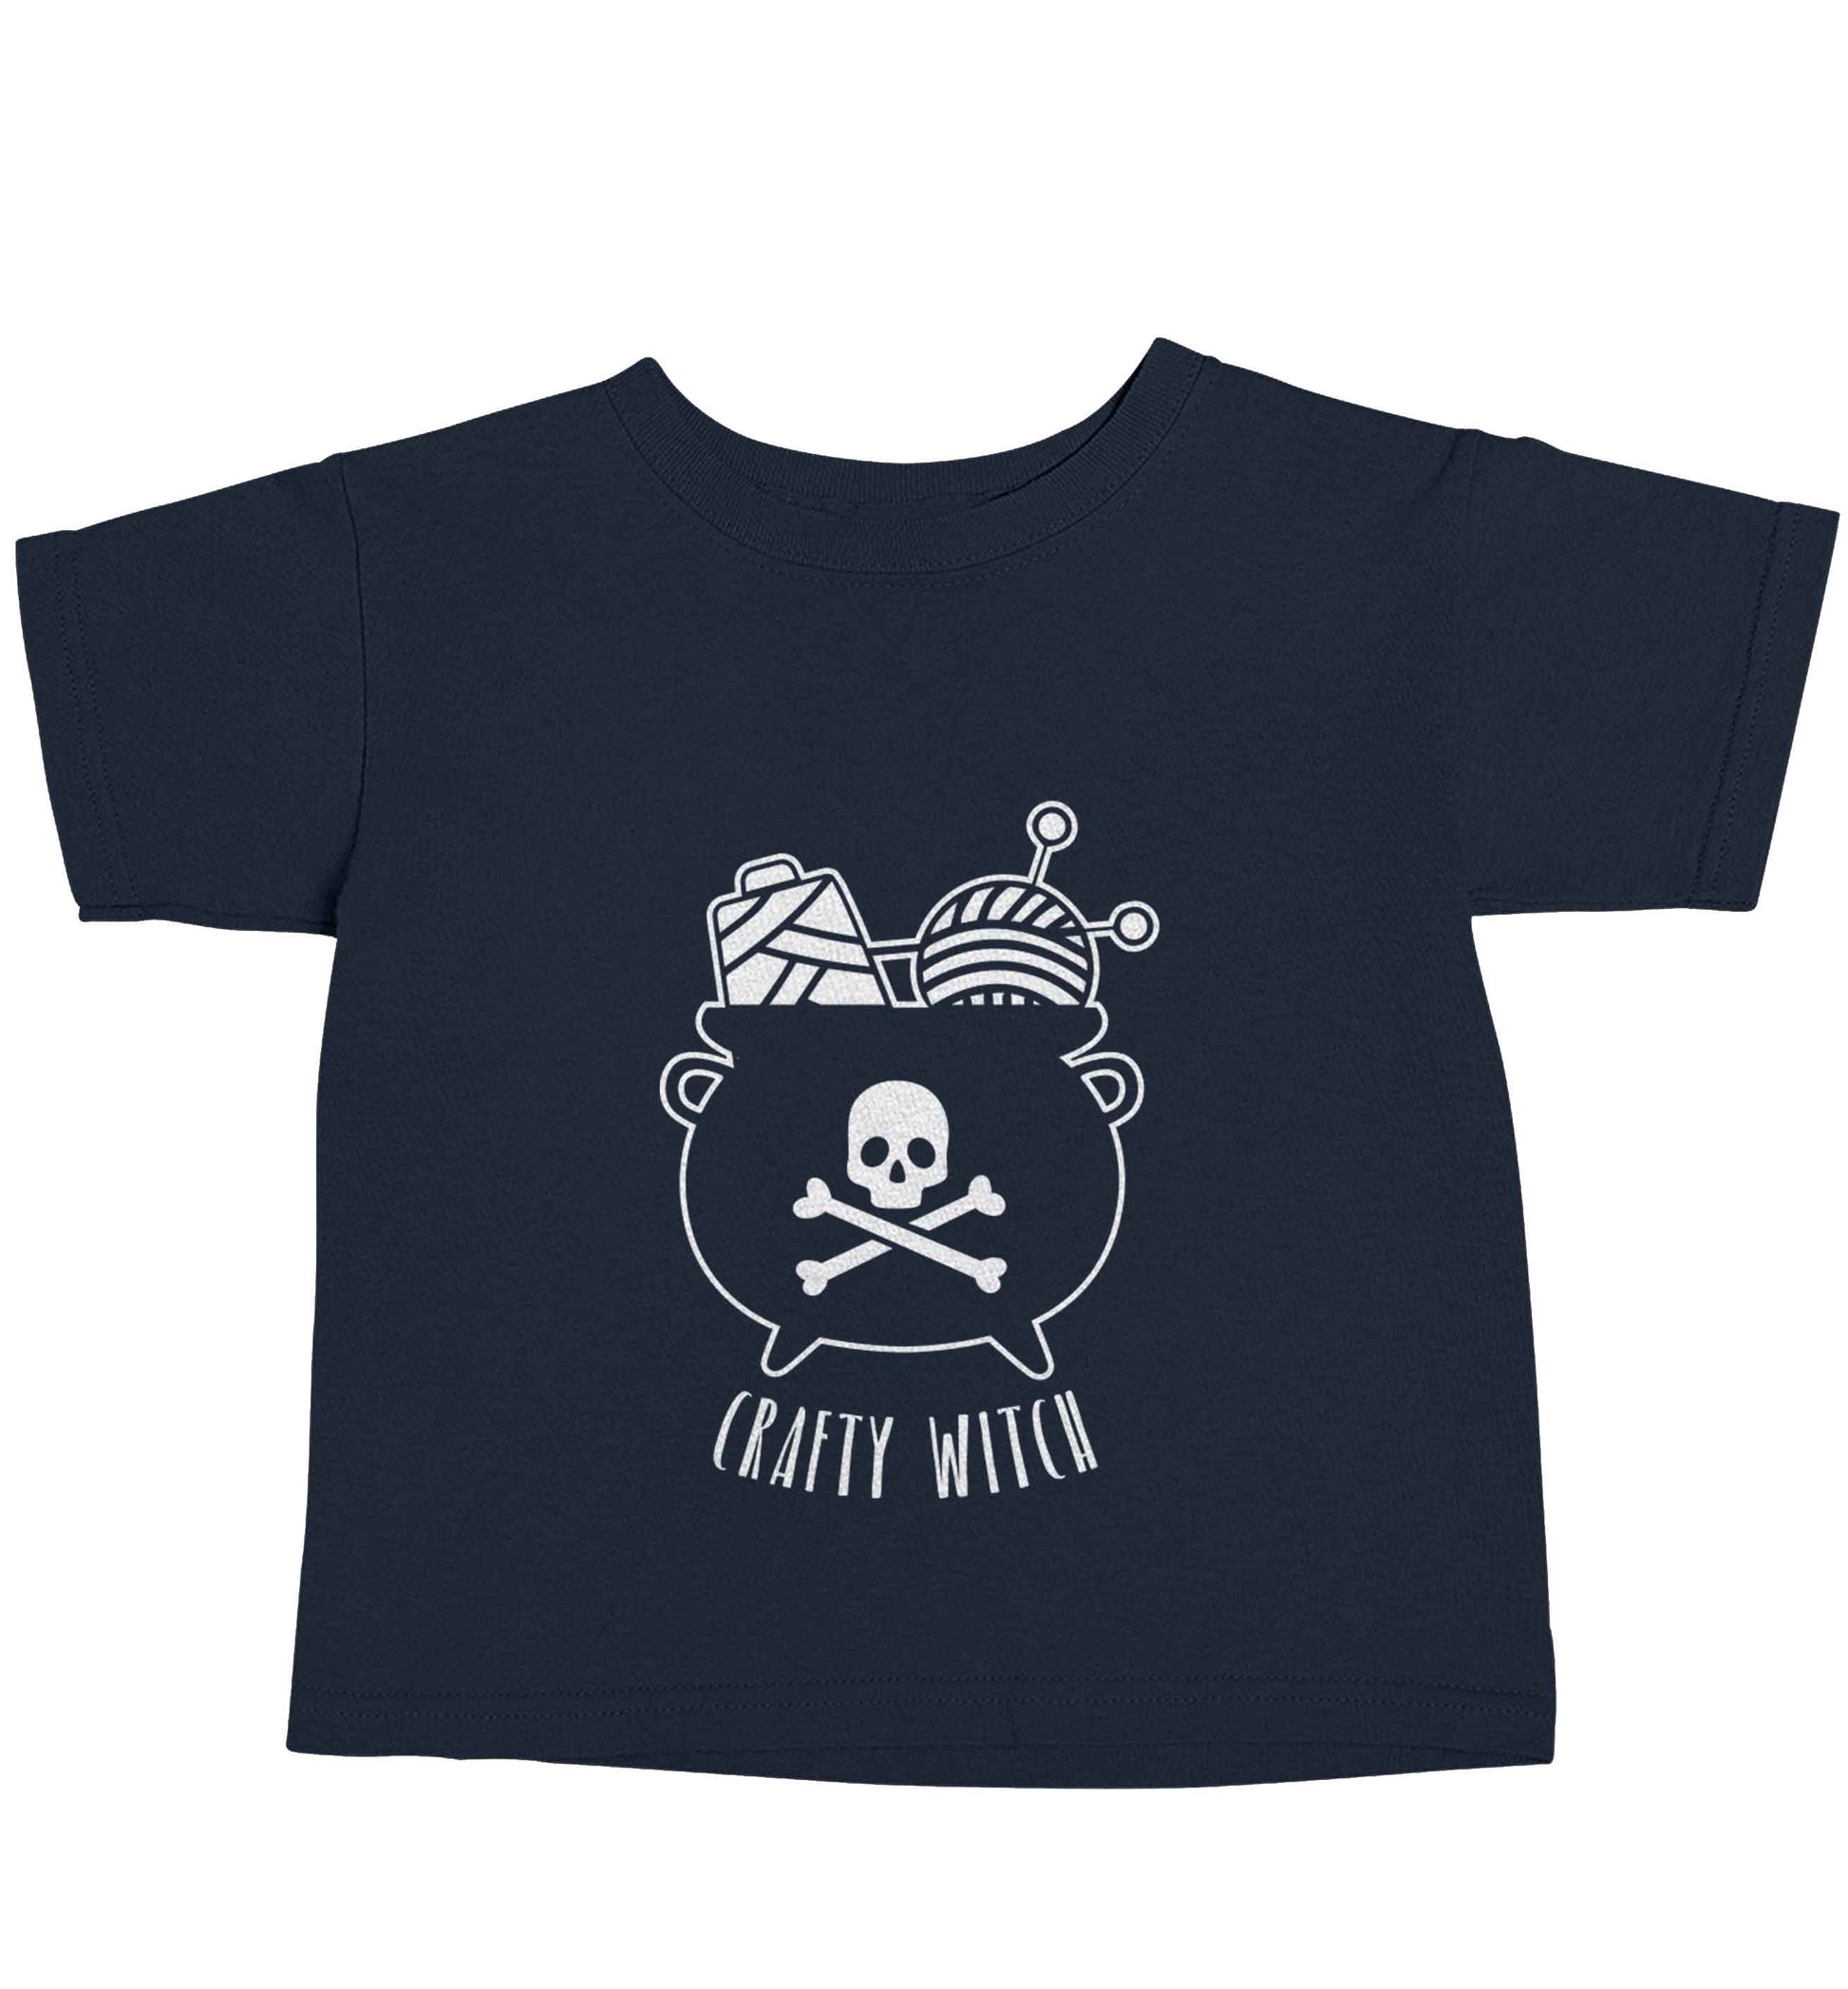 Crafty witch navy baby toddler Tshirt 2 Years